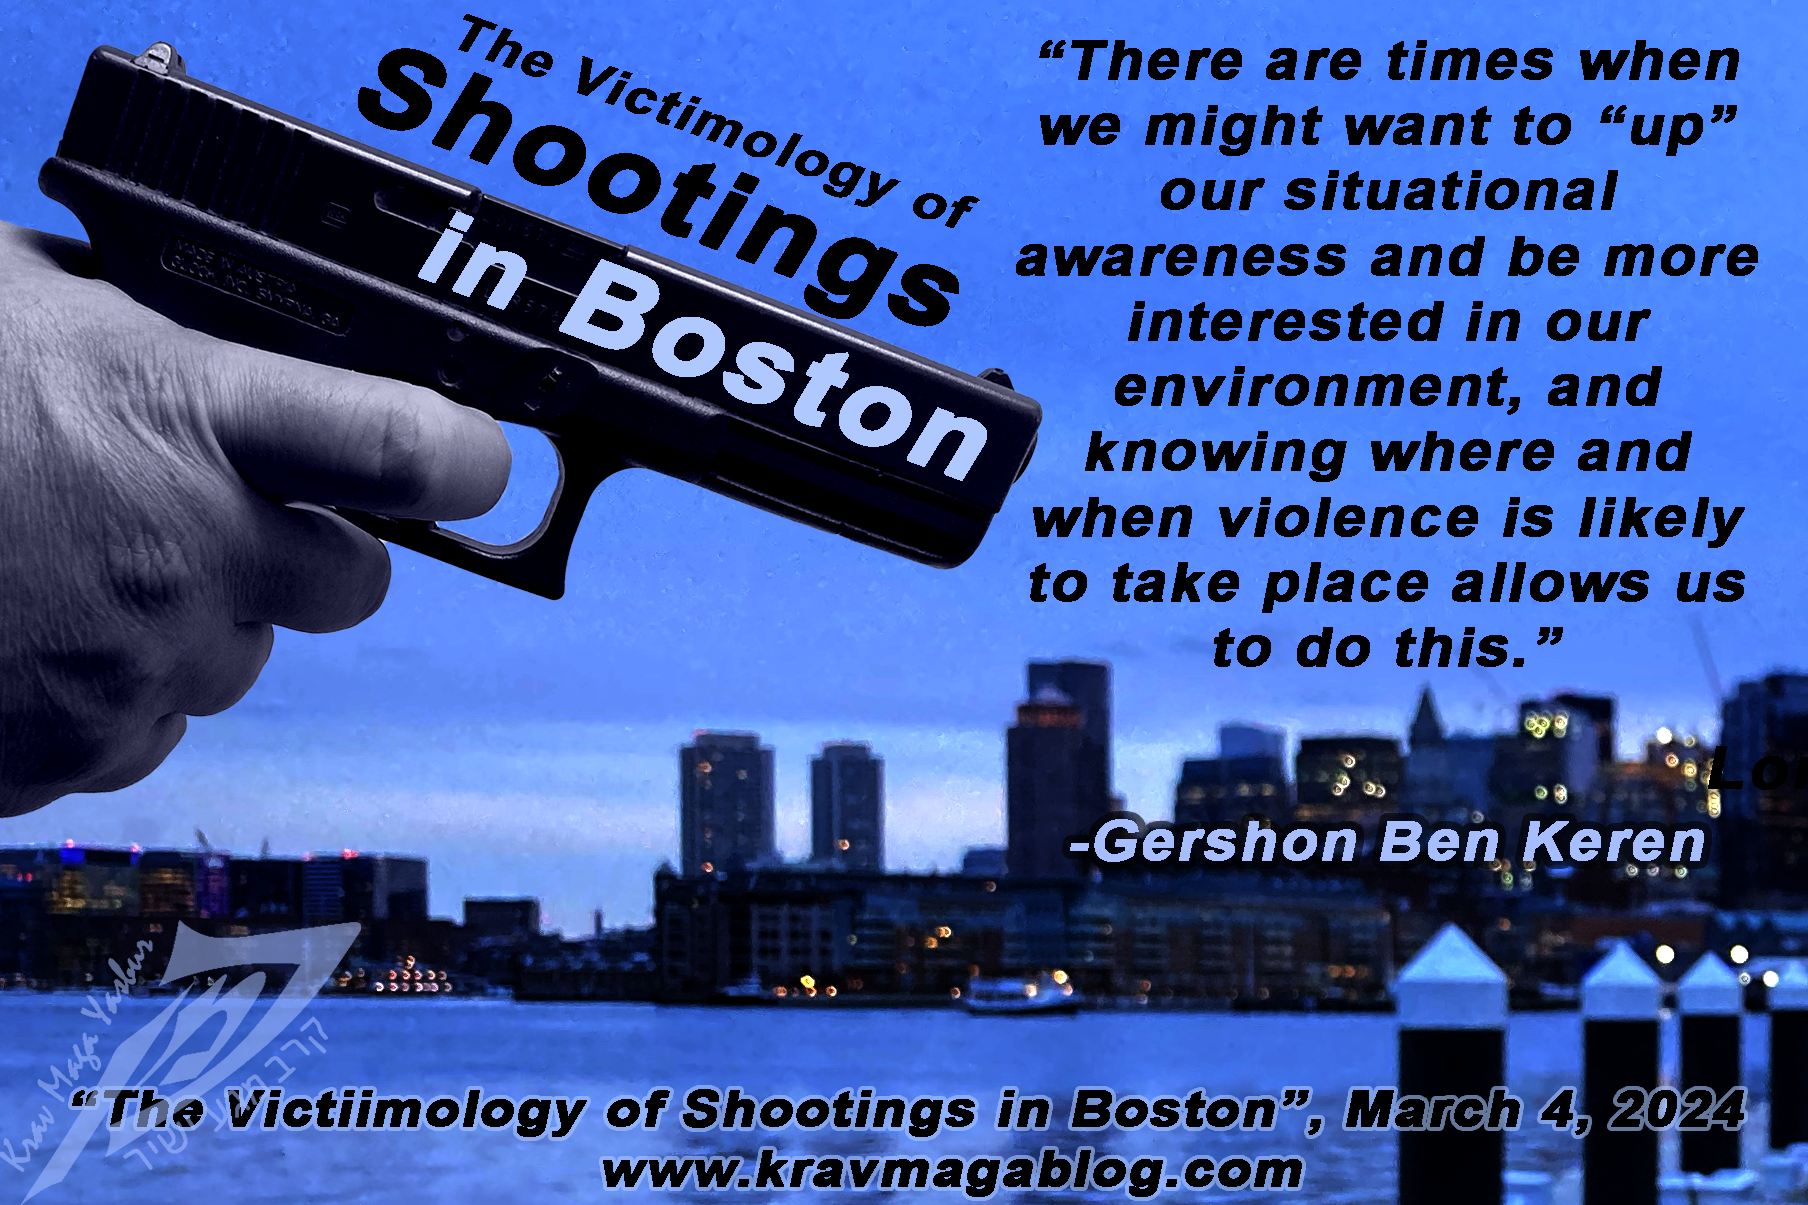 The Victimology of Shootings in Boston